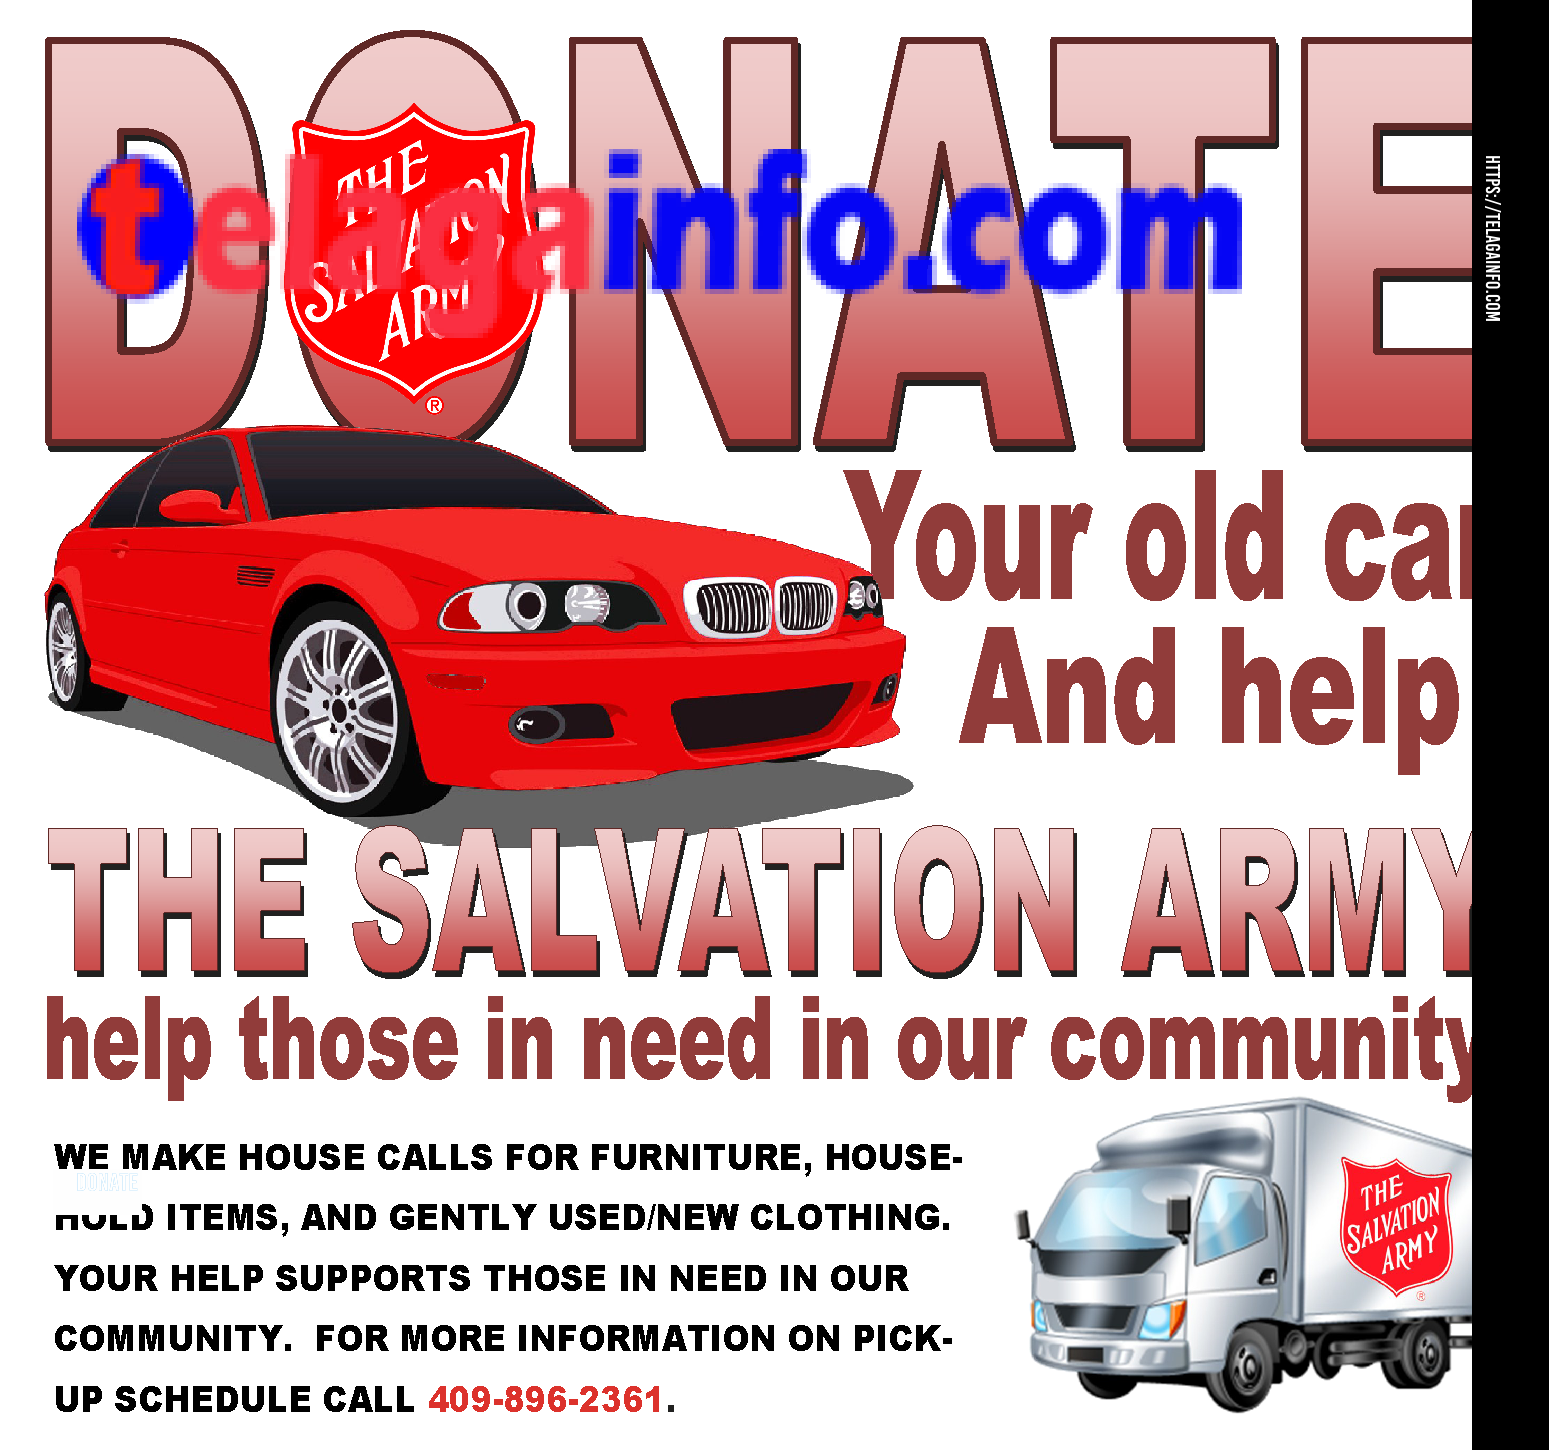 Local Charities that Accept Car Donations